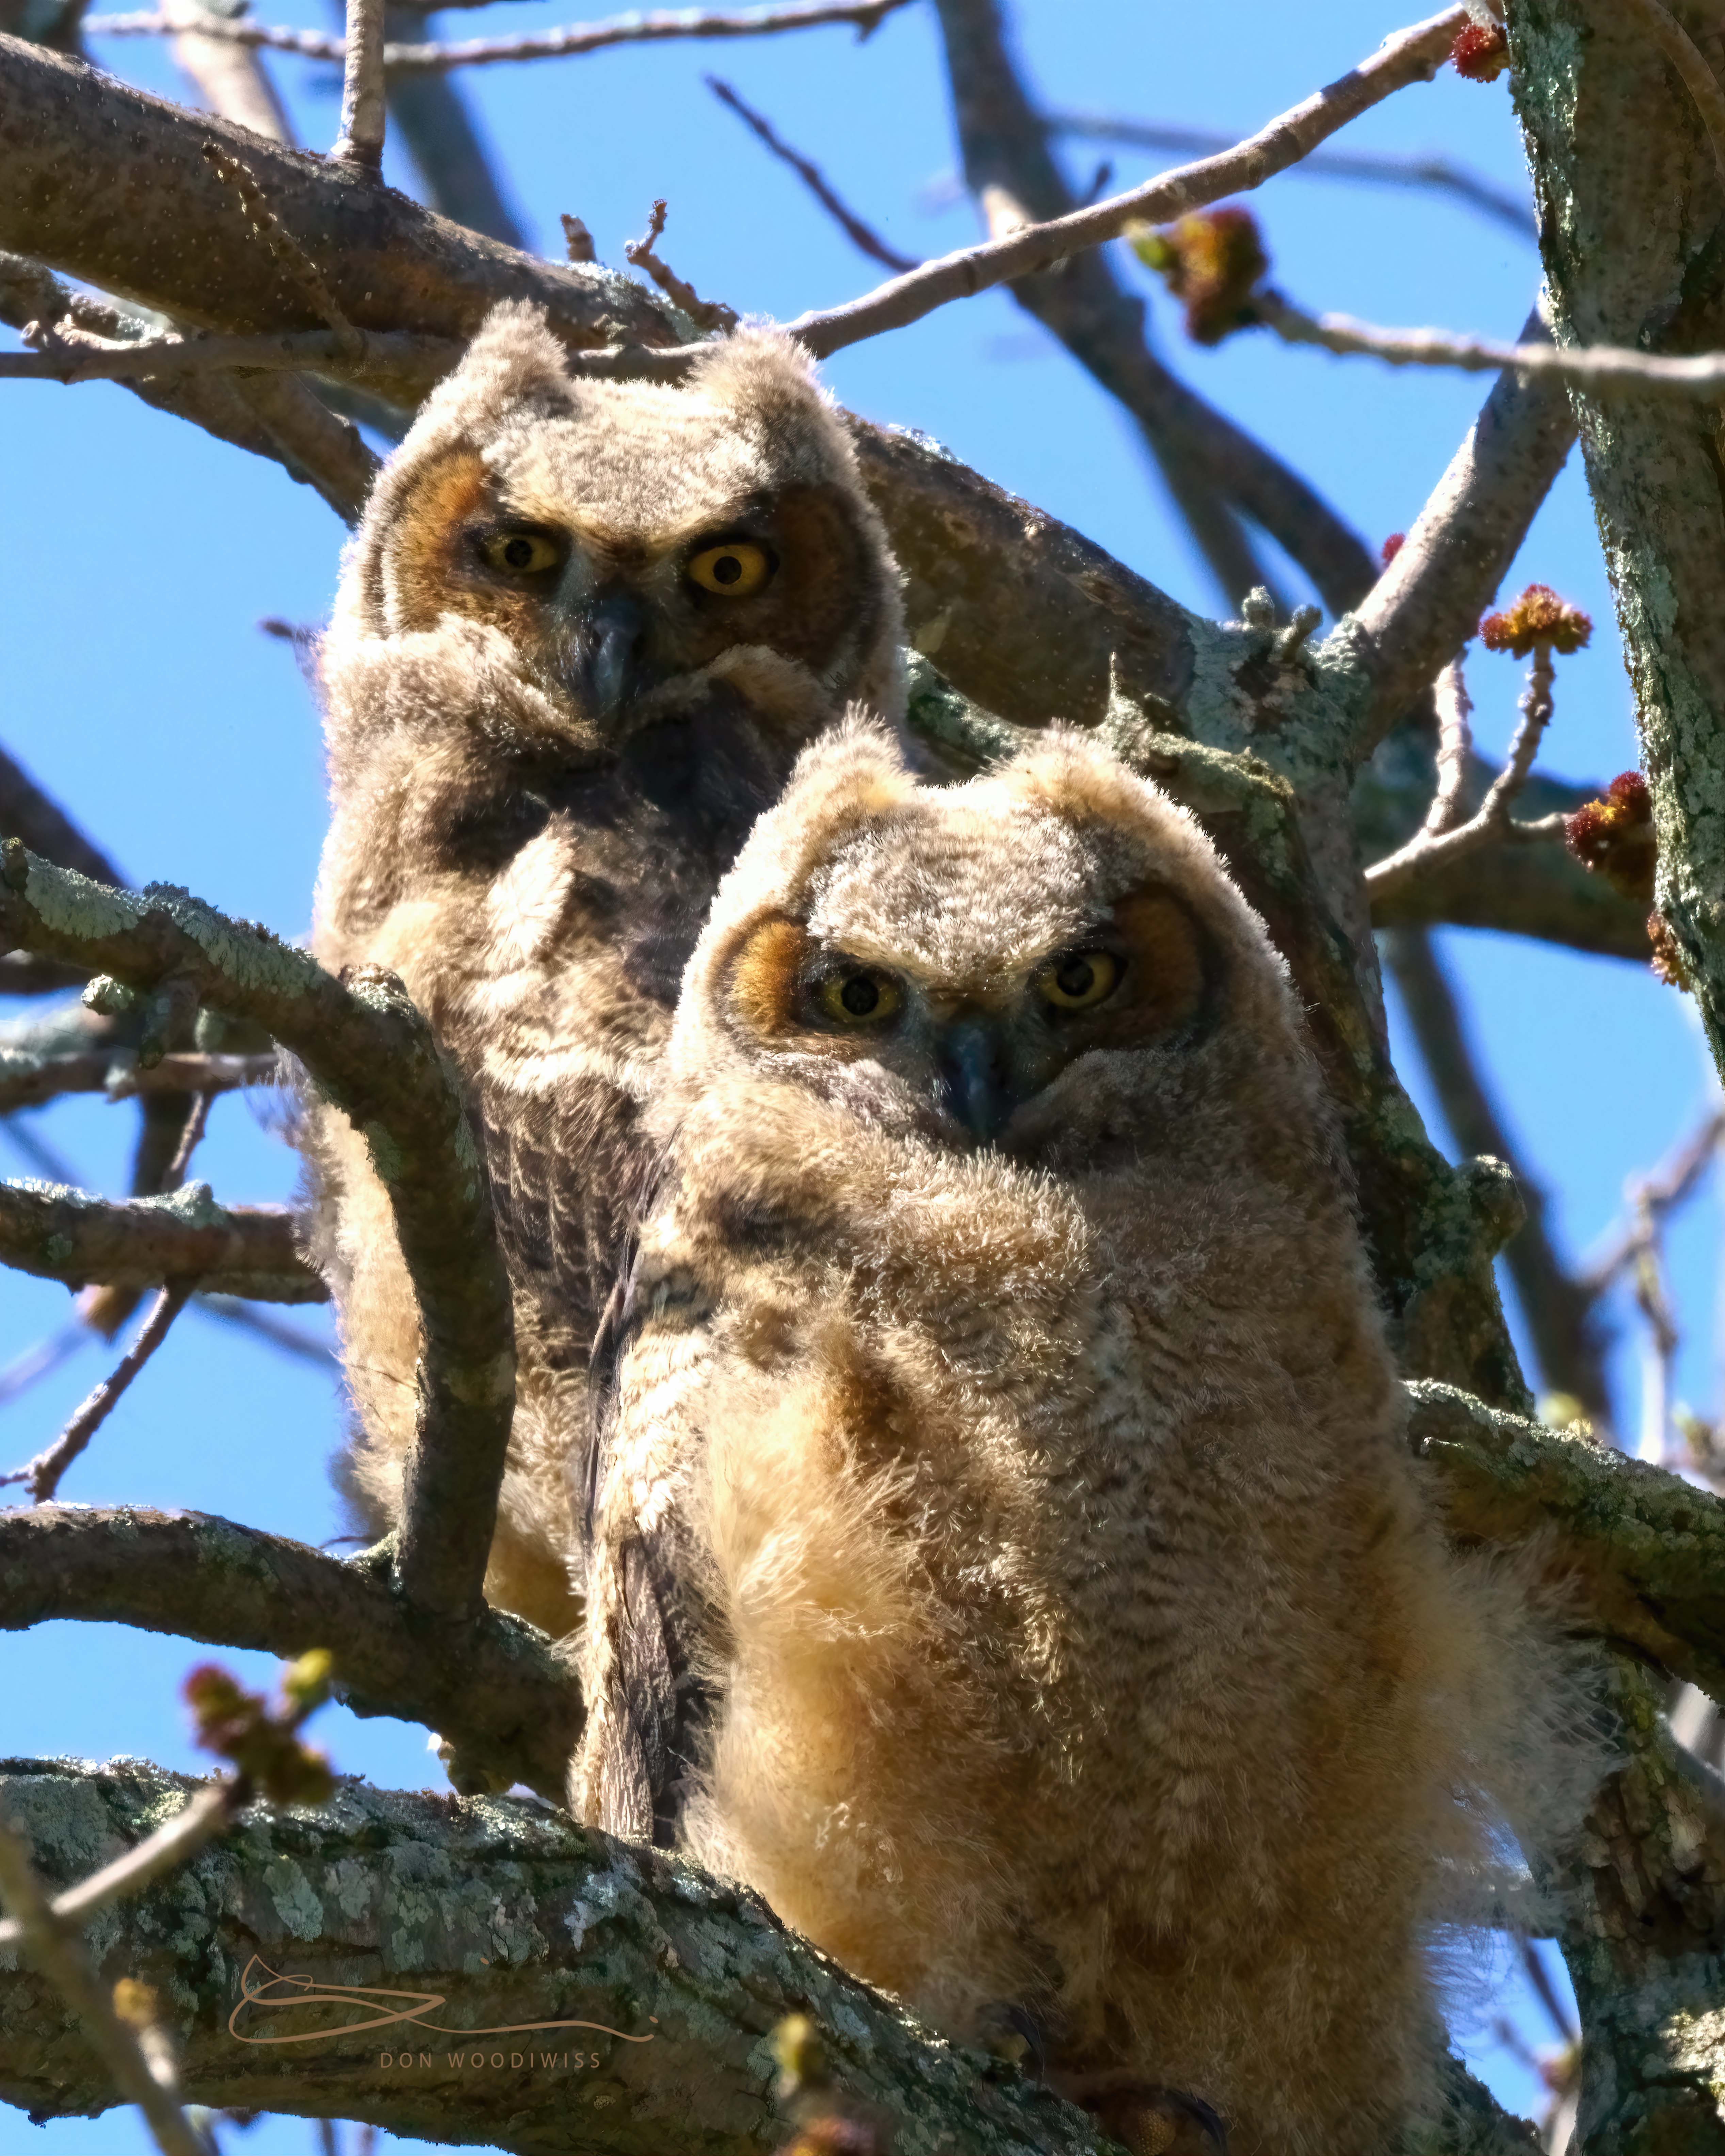 Long Eared Owlets-Don Woodiwiss-Woodiwiss Photography-Amherst Island